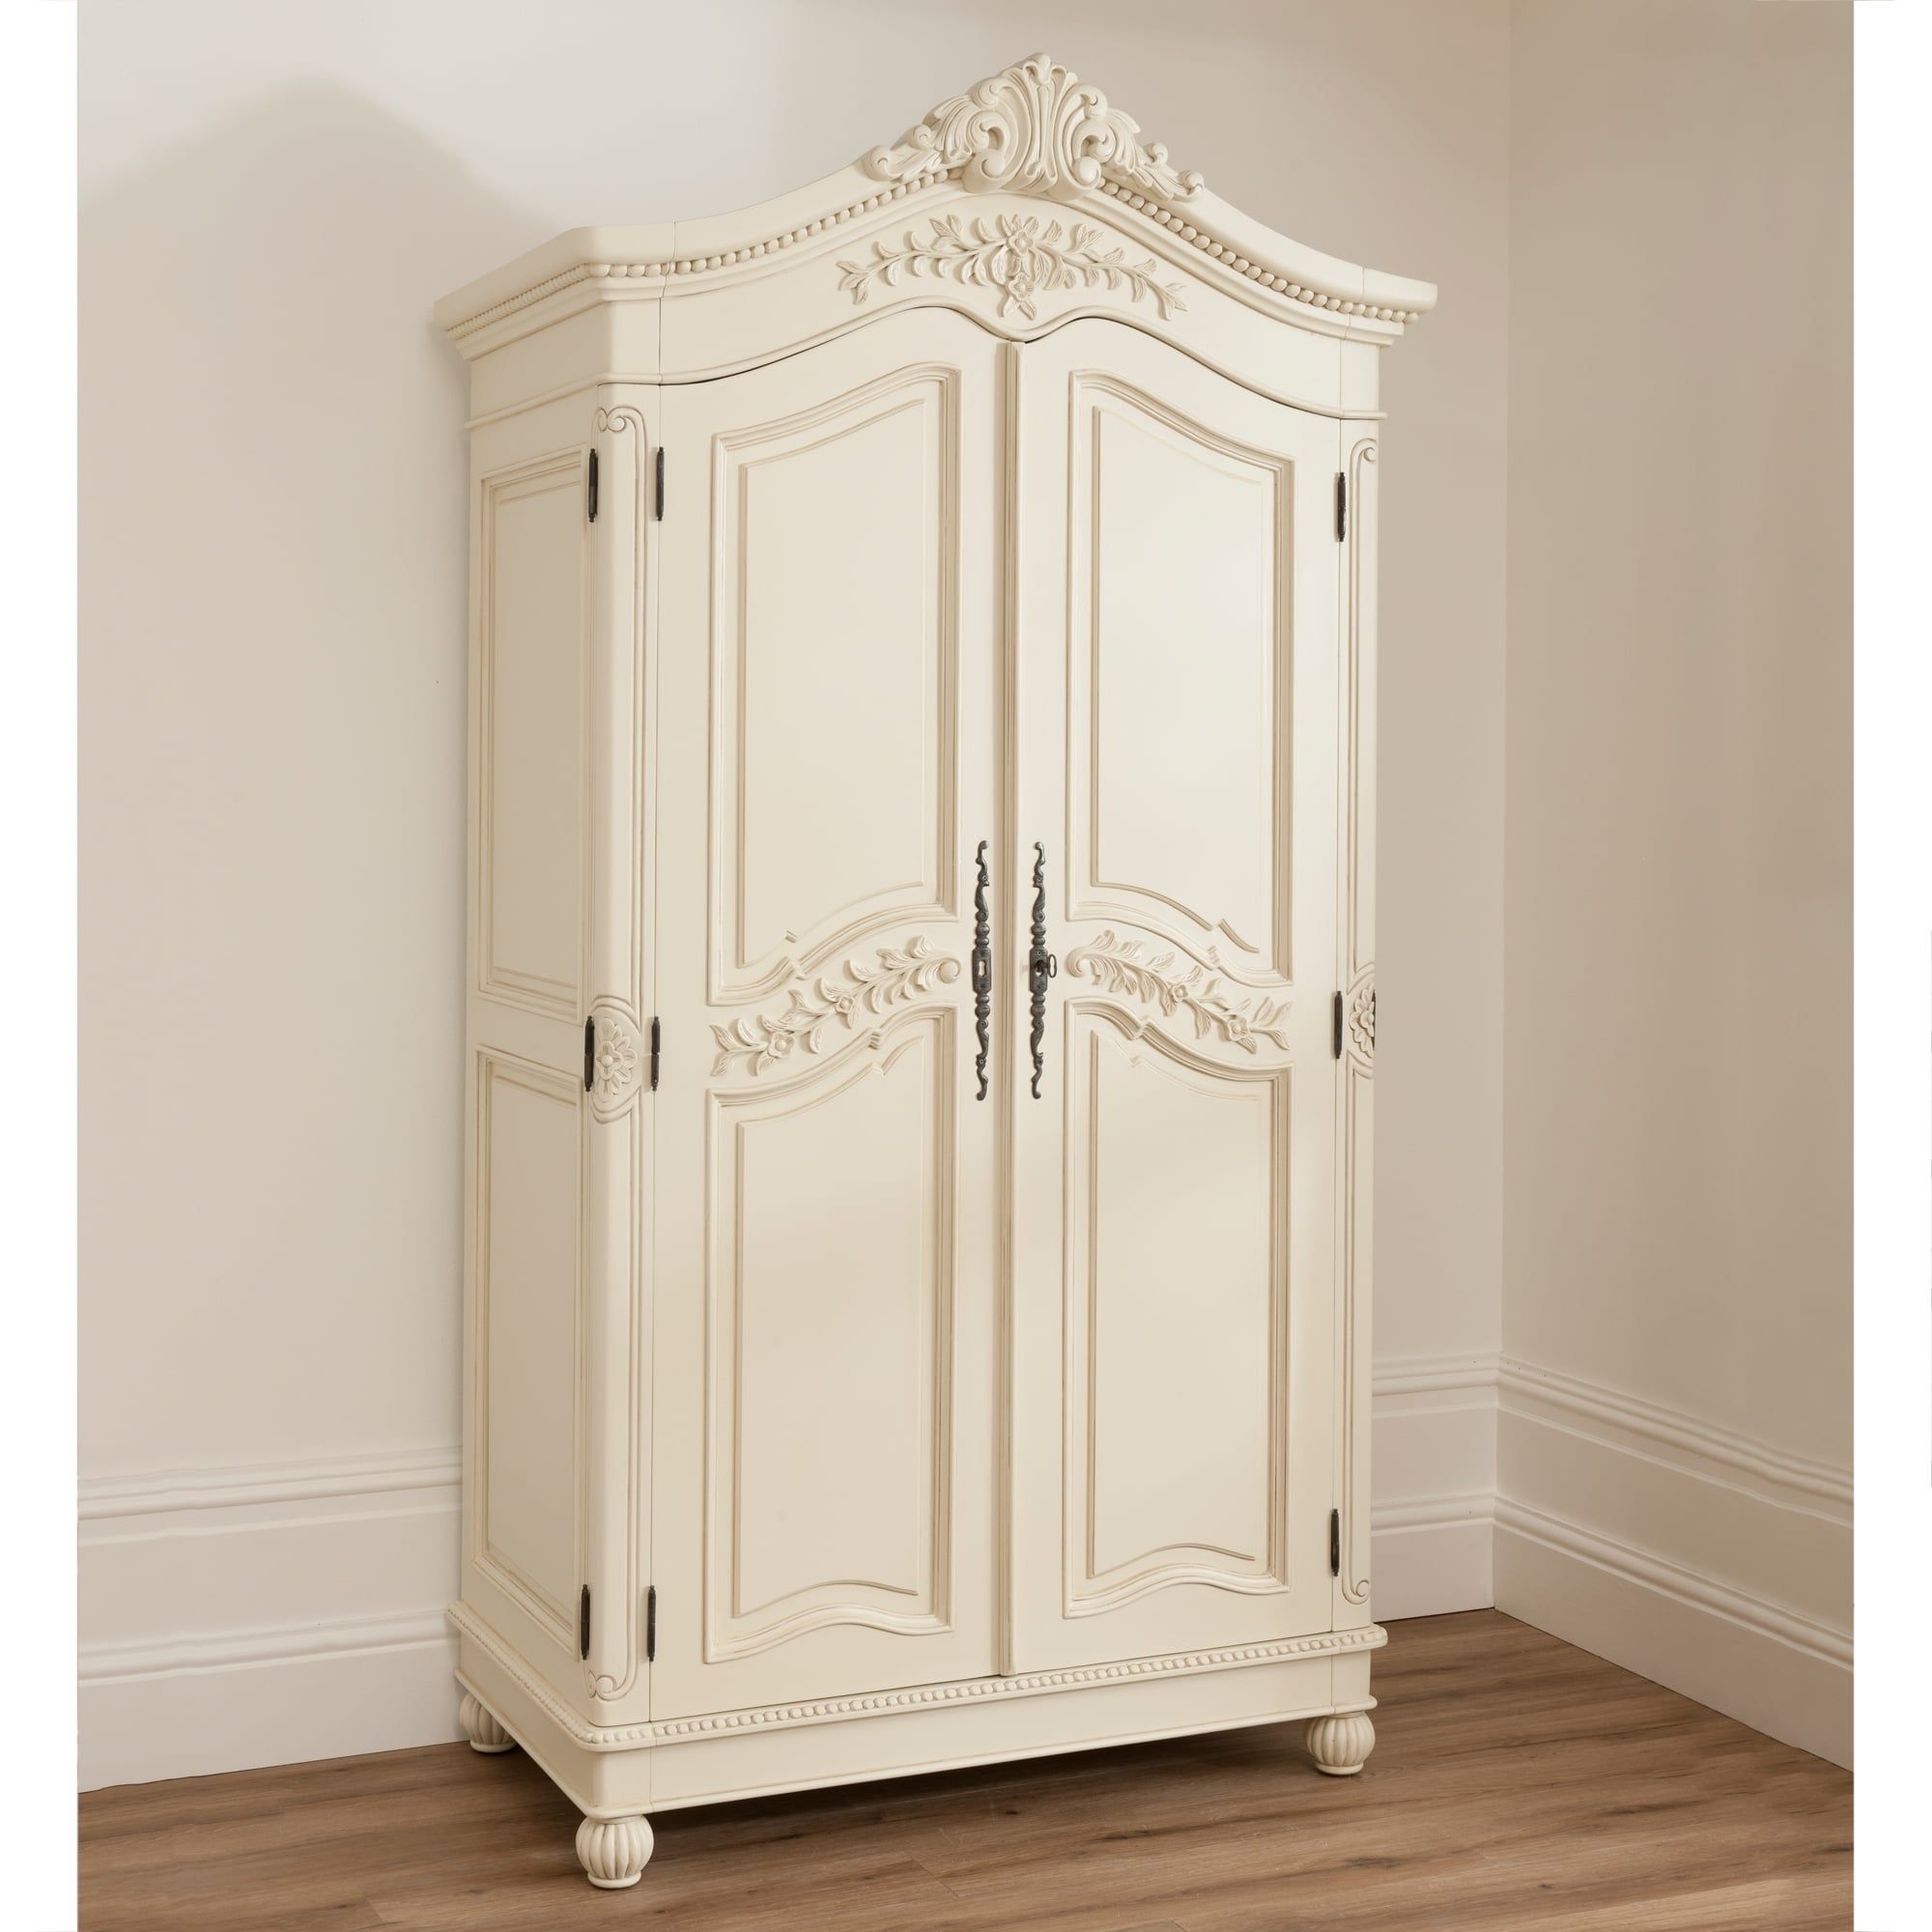 Shabby Chic Wardrobe For Your New Modern Lifestyle – Darbylanefurniture  | Shabby Chic Wardrobe, Shabby Chic Bathroom, Shabby Chic Curtains Throughout Chic Wardrobes (View 4 of 15)